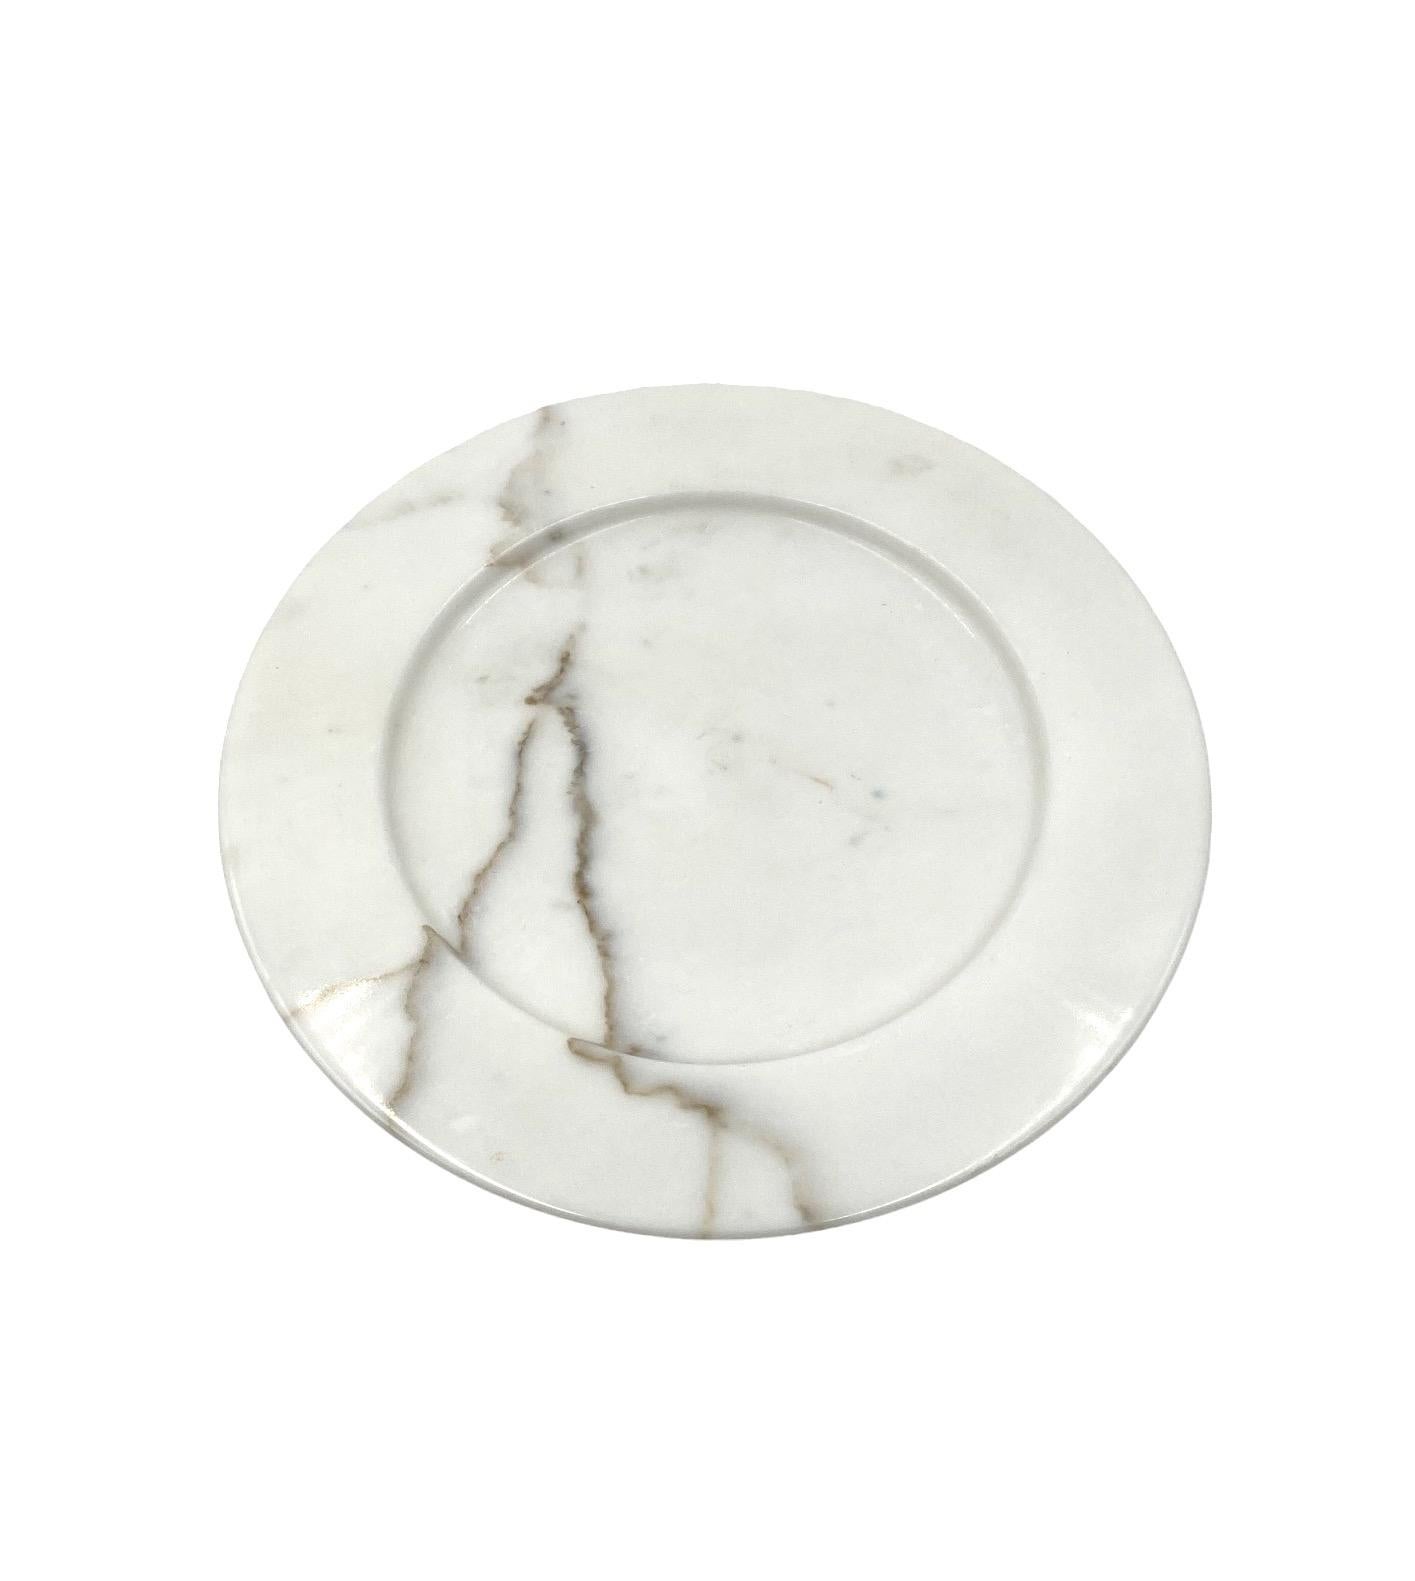 White Carrara marble centerpiece / plate, Up&Up Italy, 1970s For Sale 3